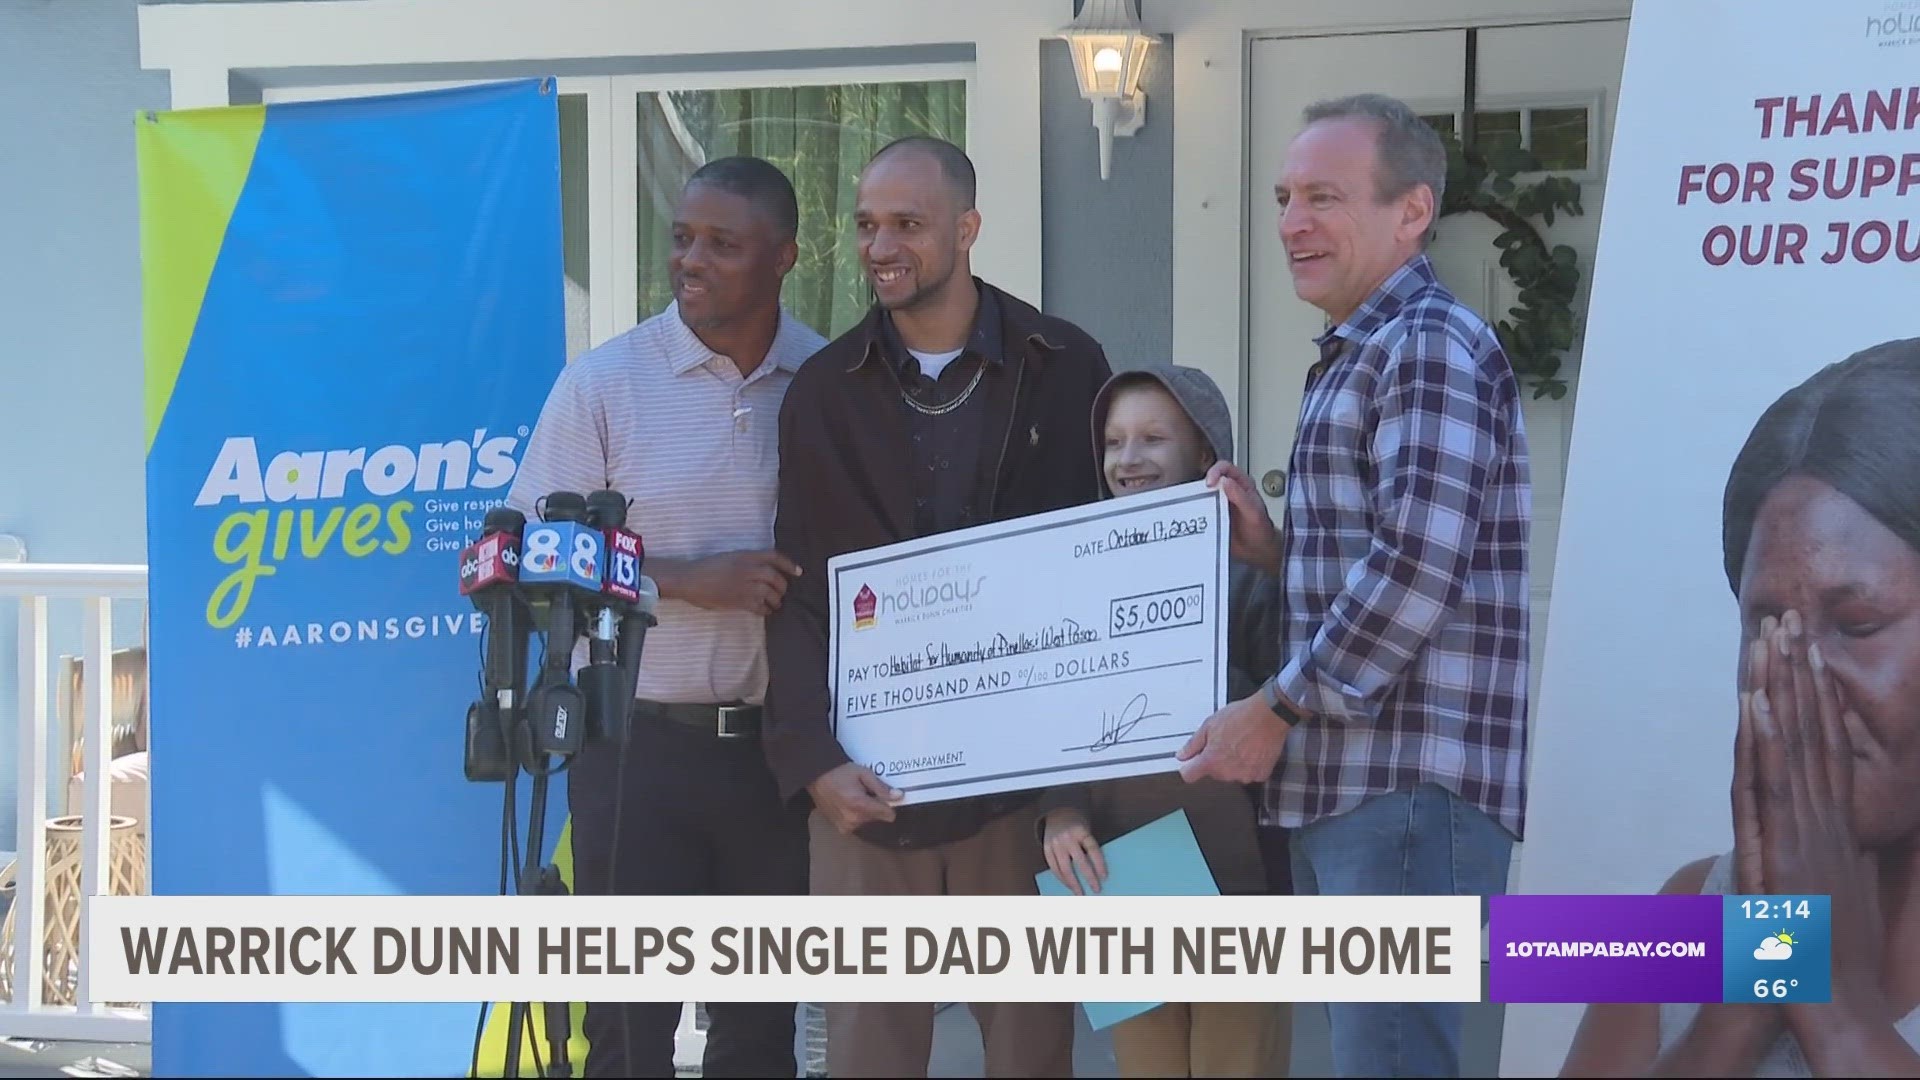 Dunn's charity partnered with Habitat for Humanity to help a single dad and his 10-year-old son have a new home.